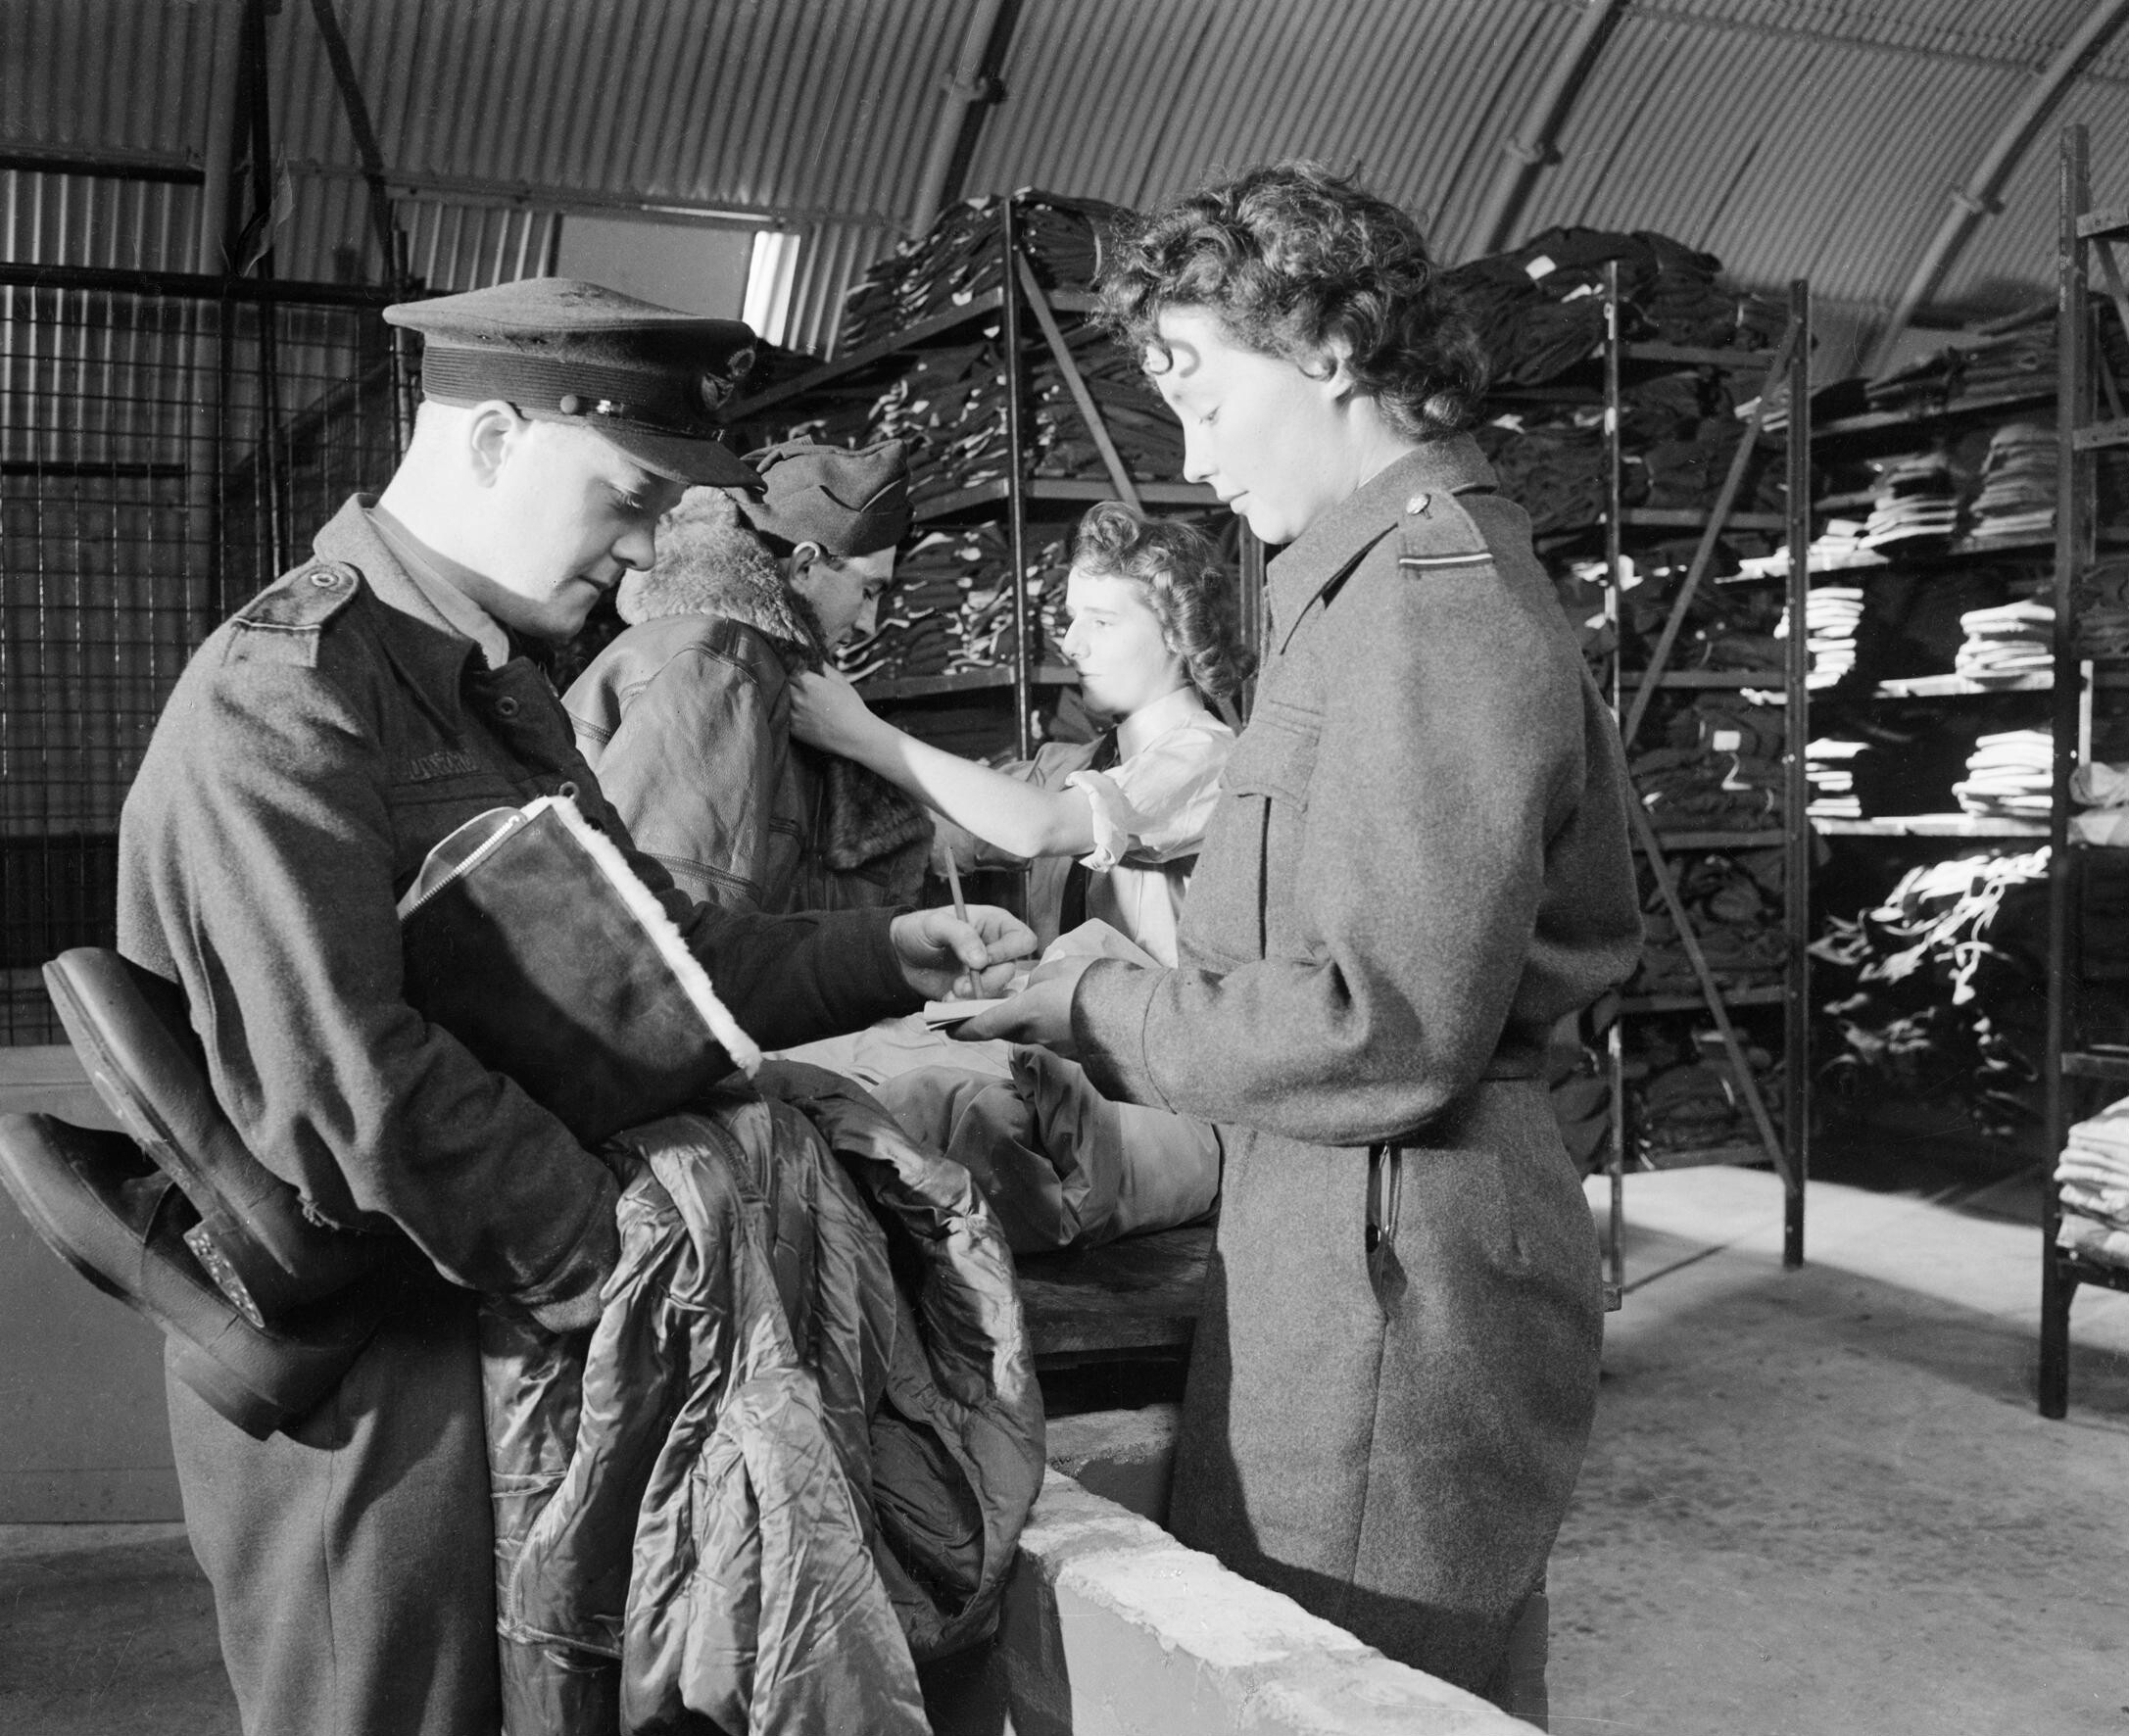 A WAAF section officer and her assistant issue new items of flying kit to aircrew at an RAF bomber station, August 1944. CH13713